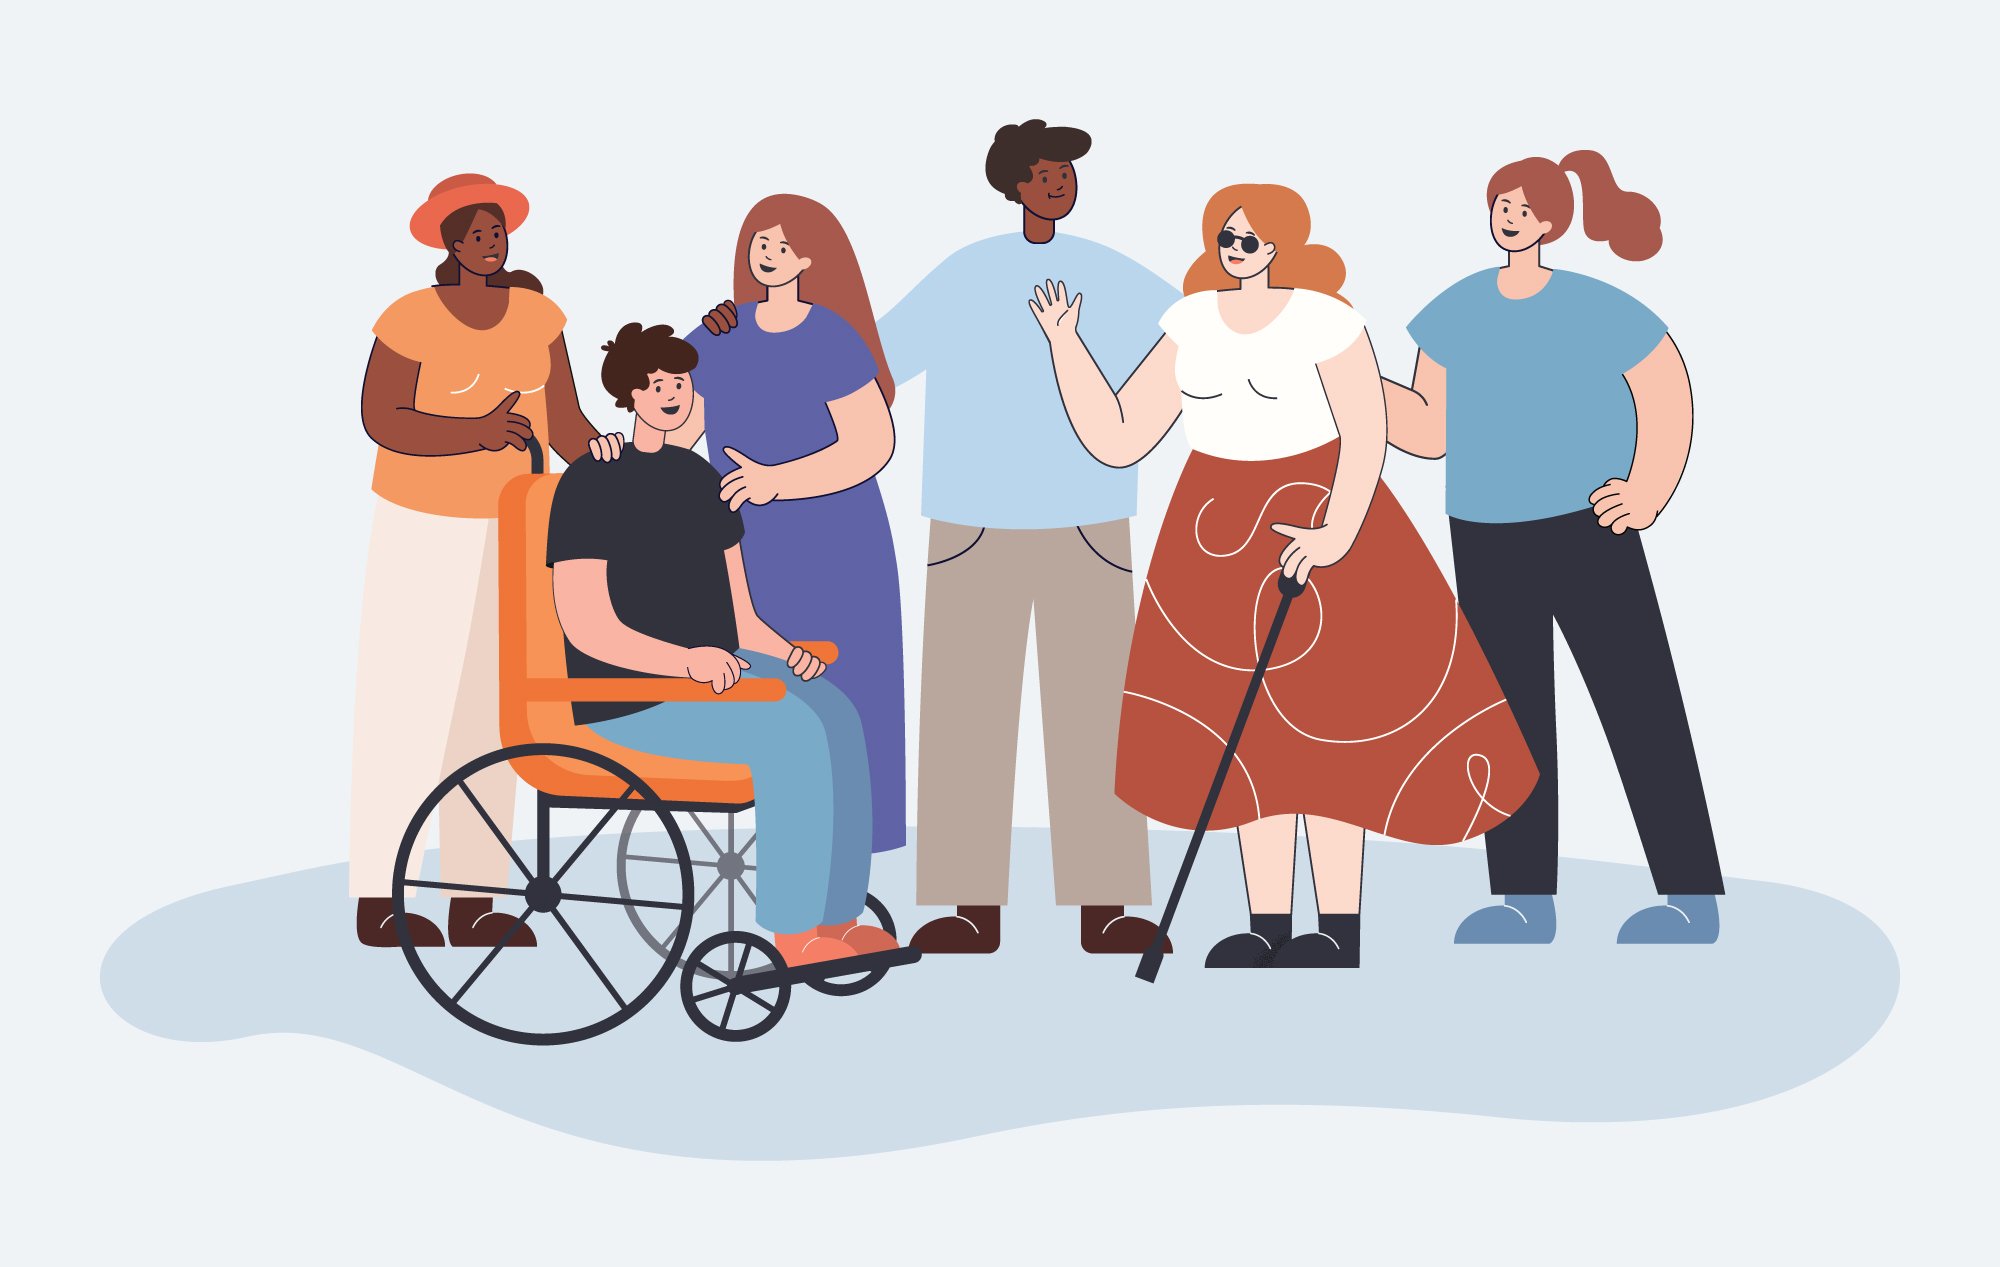 A diverse group of people welcoming each other. One is in a wheelchair and another person is using a walking cane.